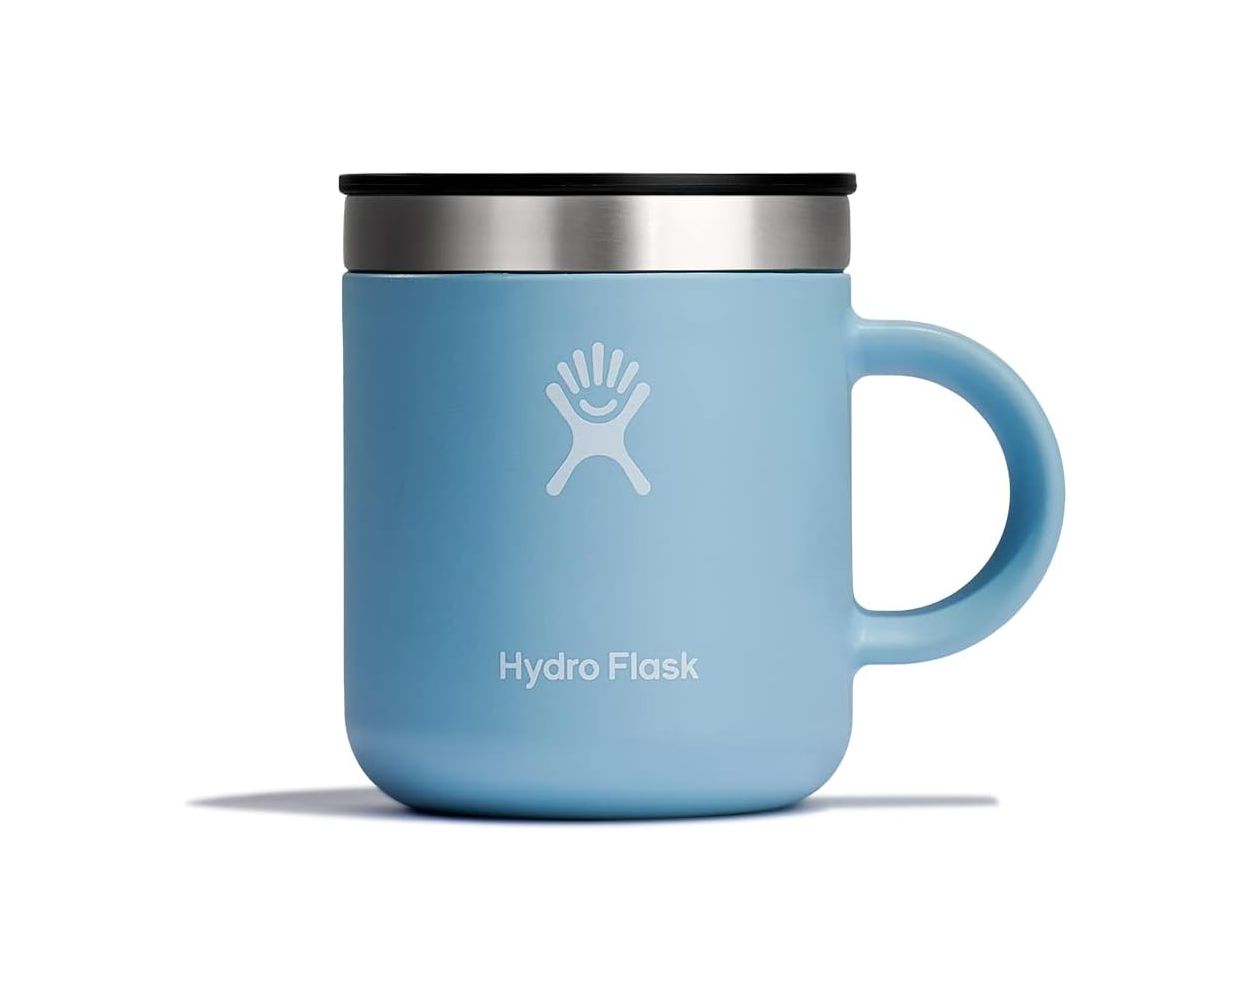 Just added a coffee mug to the collection! : r/Hydroflask